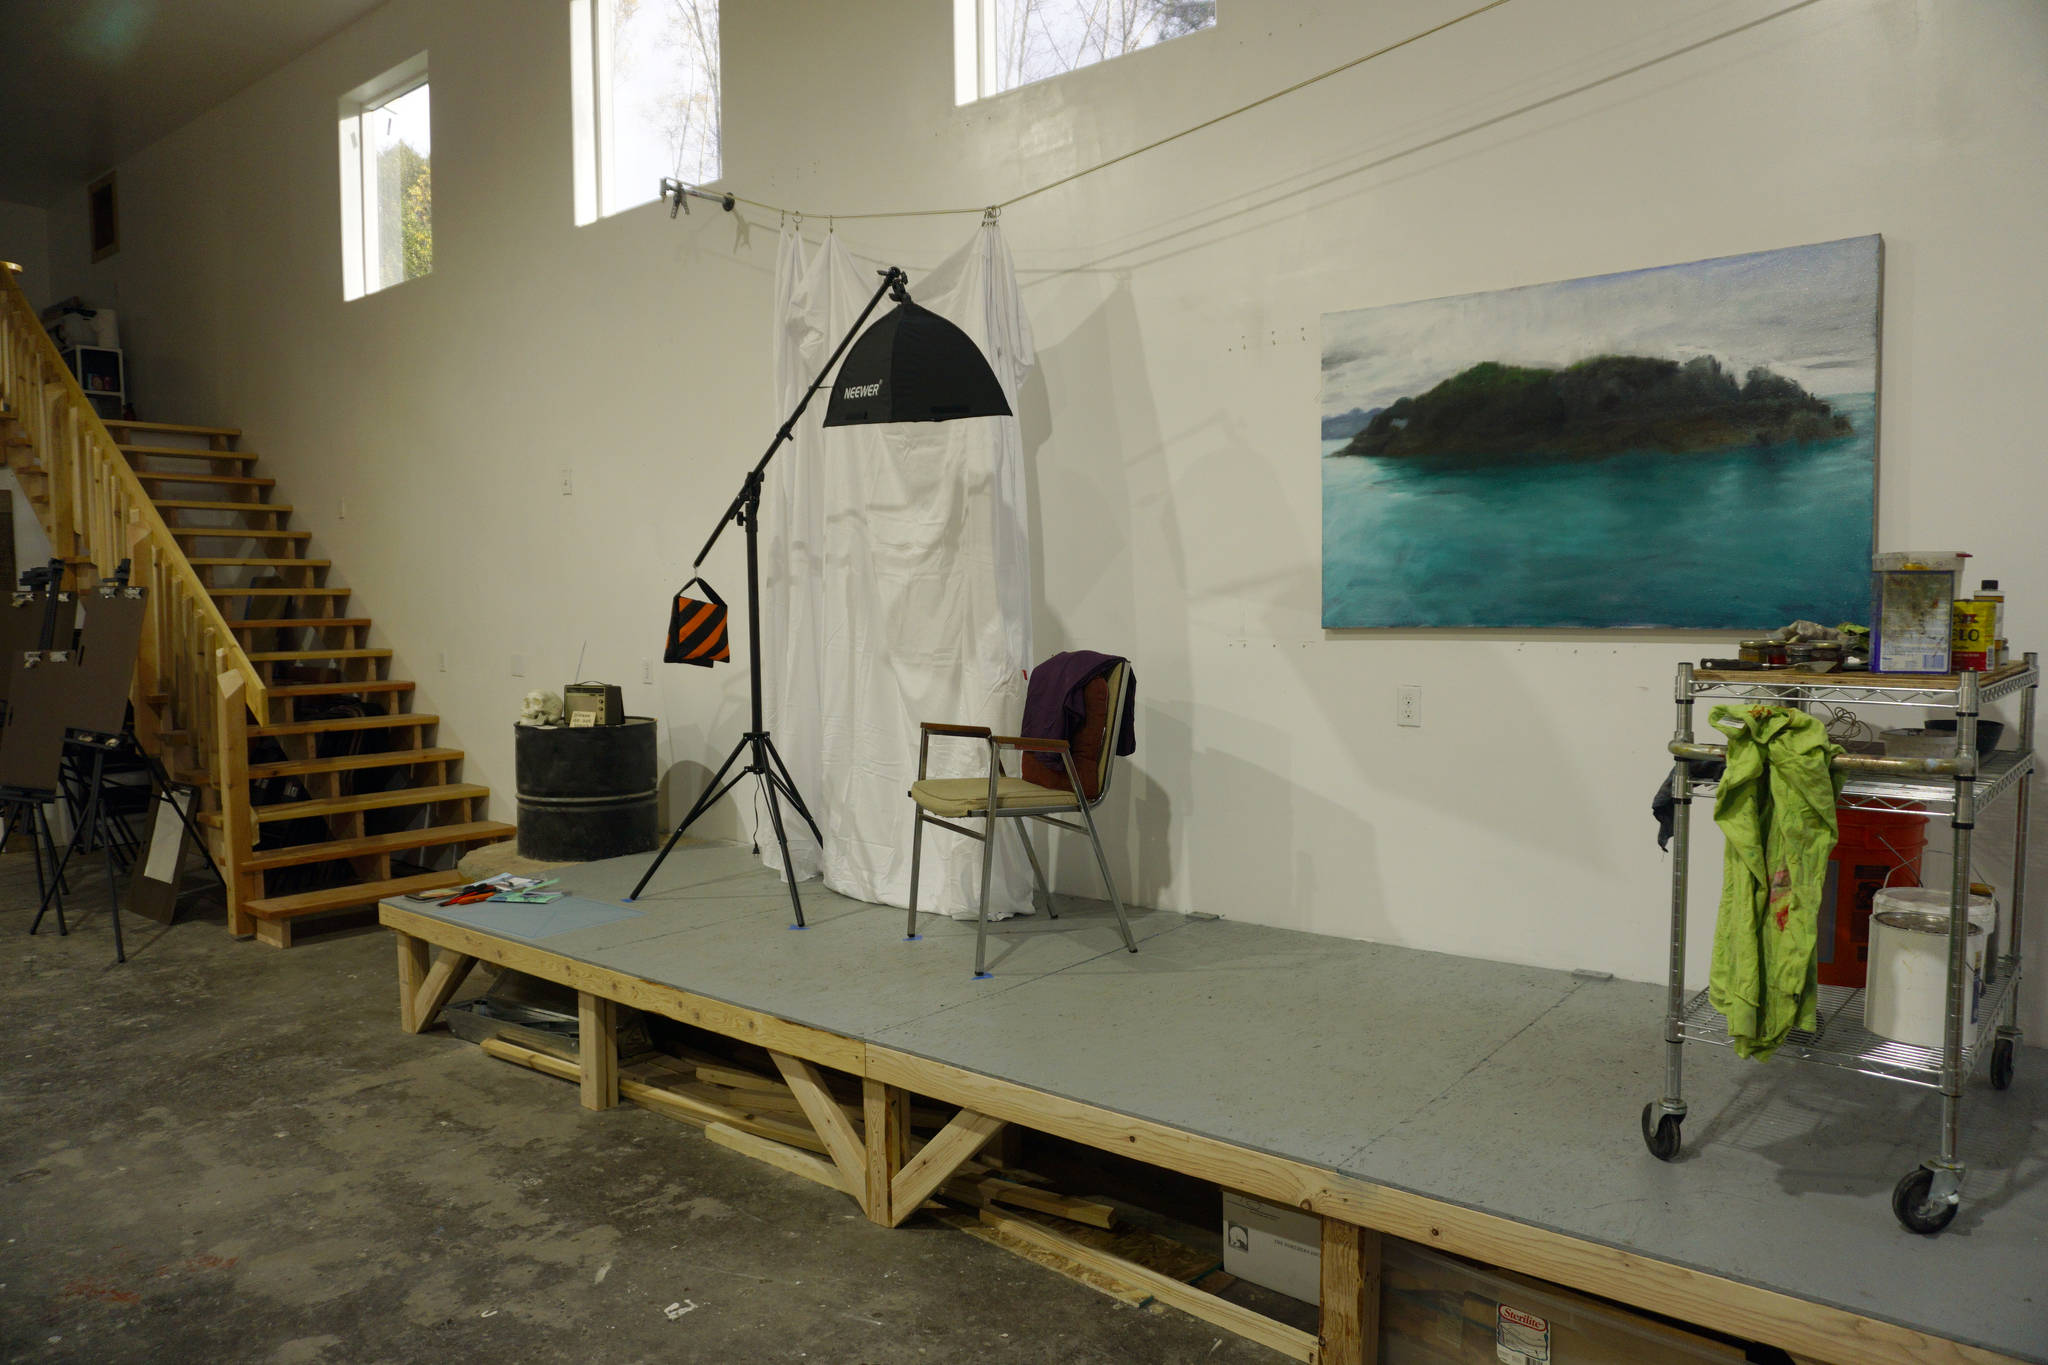 The Shop, shown here Tuesday, Oct. 16, 2018 in Kachemak City, Alaska, includes a posing space for portrait classes. Artists Elissa and David Pettibone started the art space in August. (Photo by Michael Armstrong/Homer News)